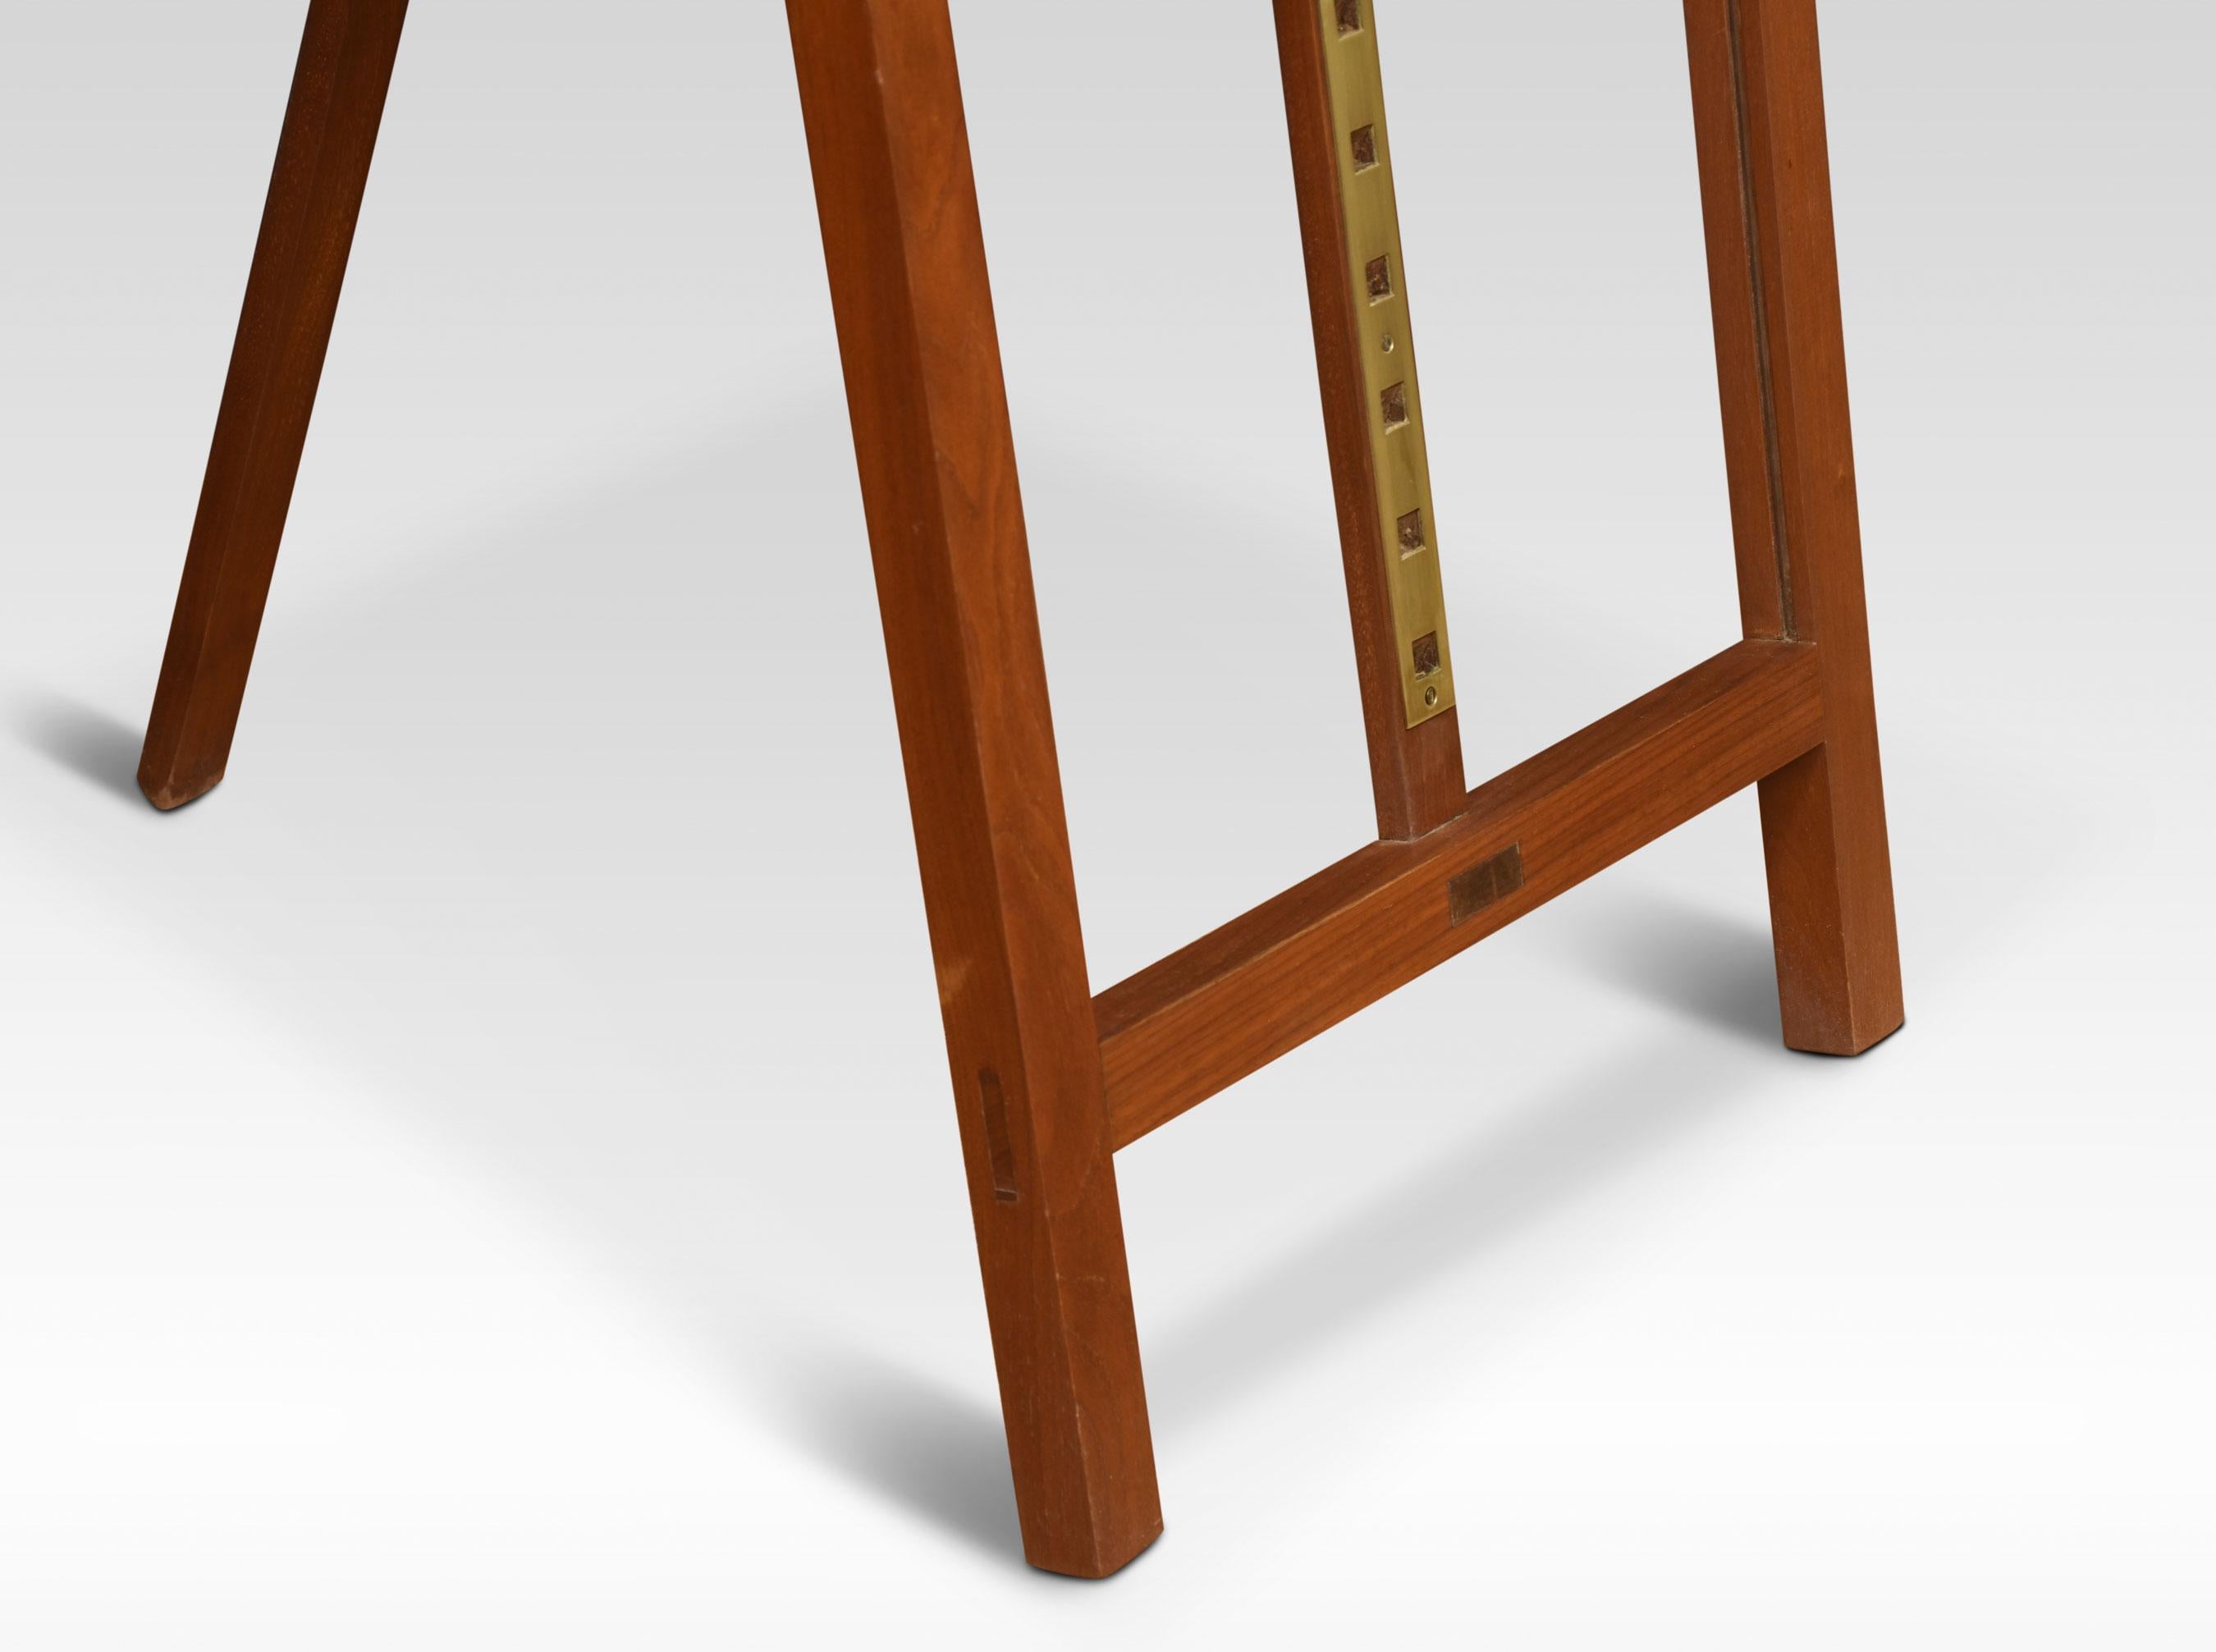 Walnut folding artists easel, the folding frame with a rise and fall shelf with hinged fall front.
Dimensions
Height 75 Inches Ajustable
Width 24 Inches
Depth 31 Inches.